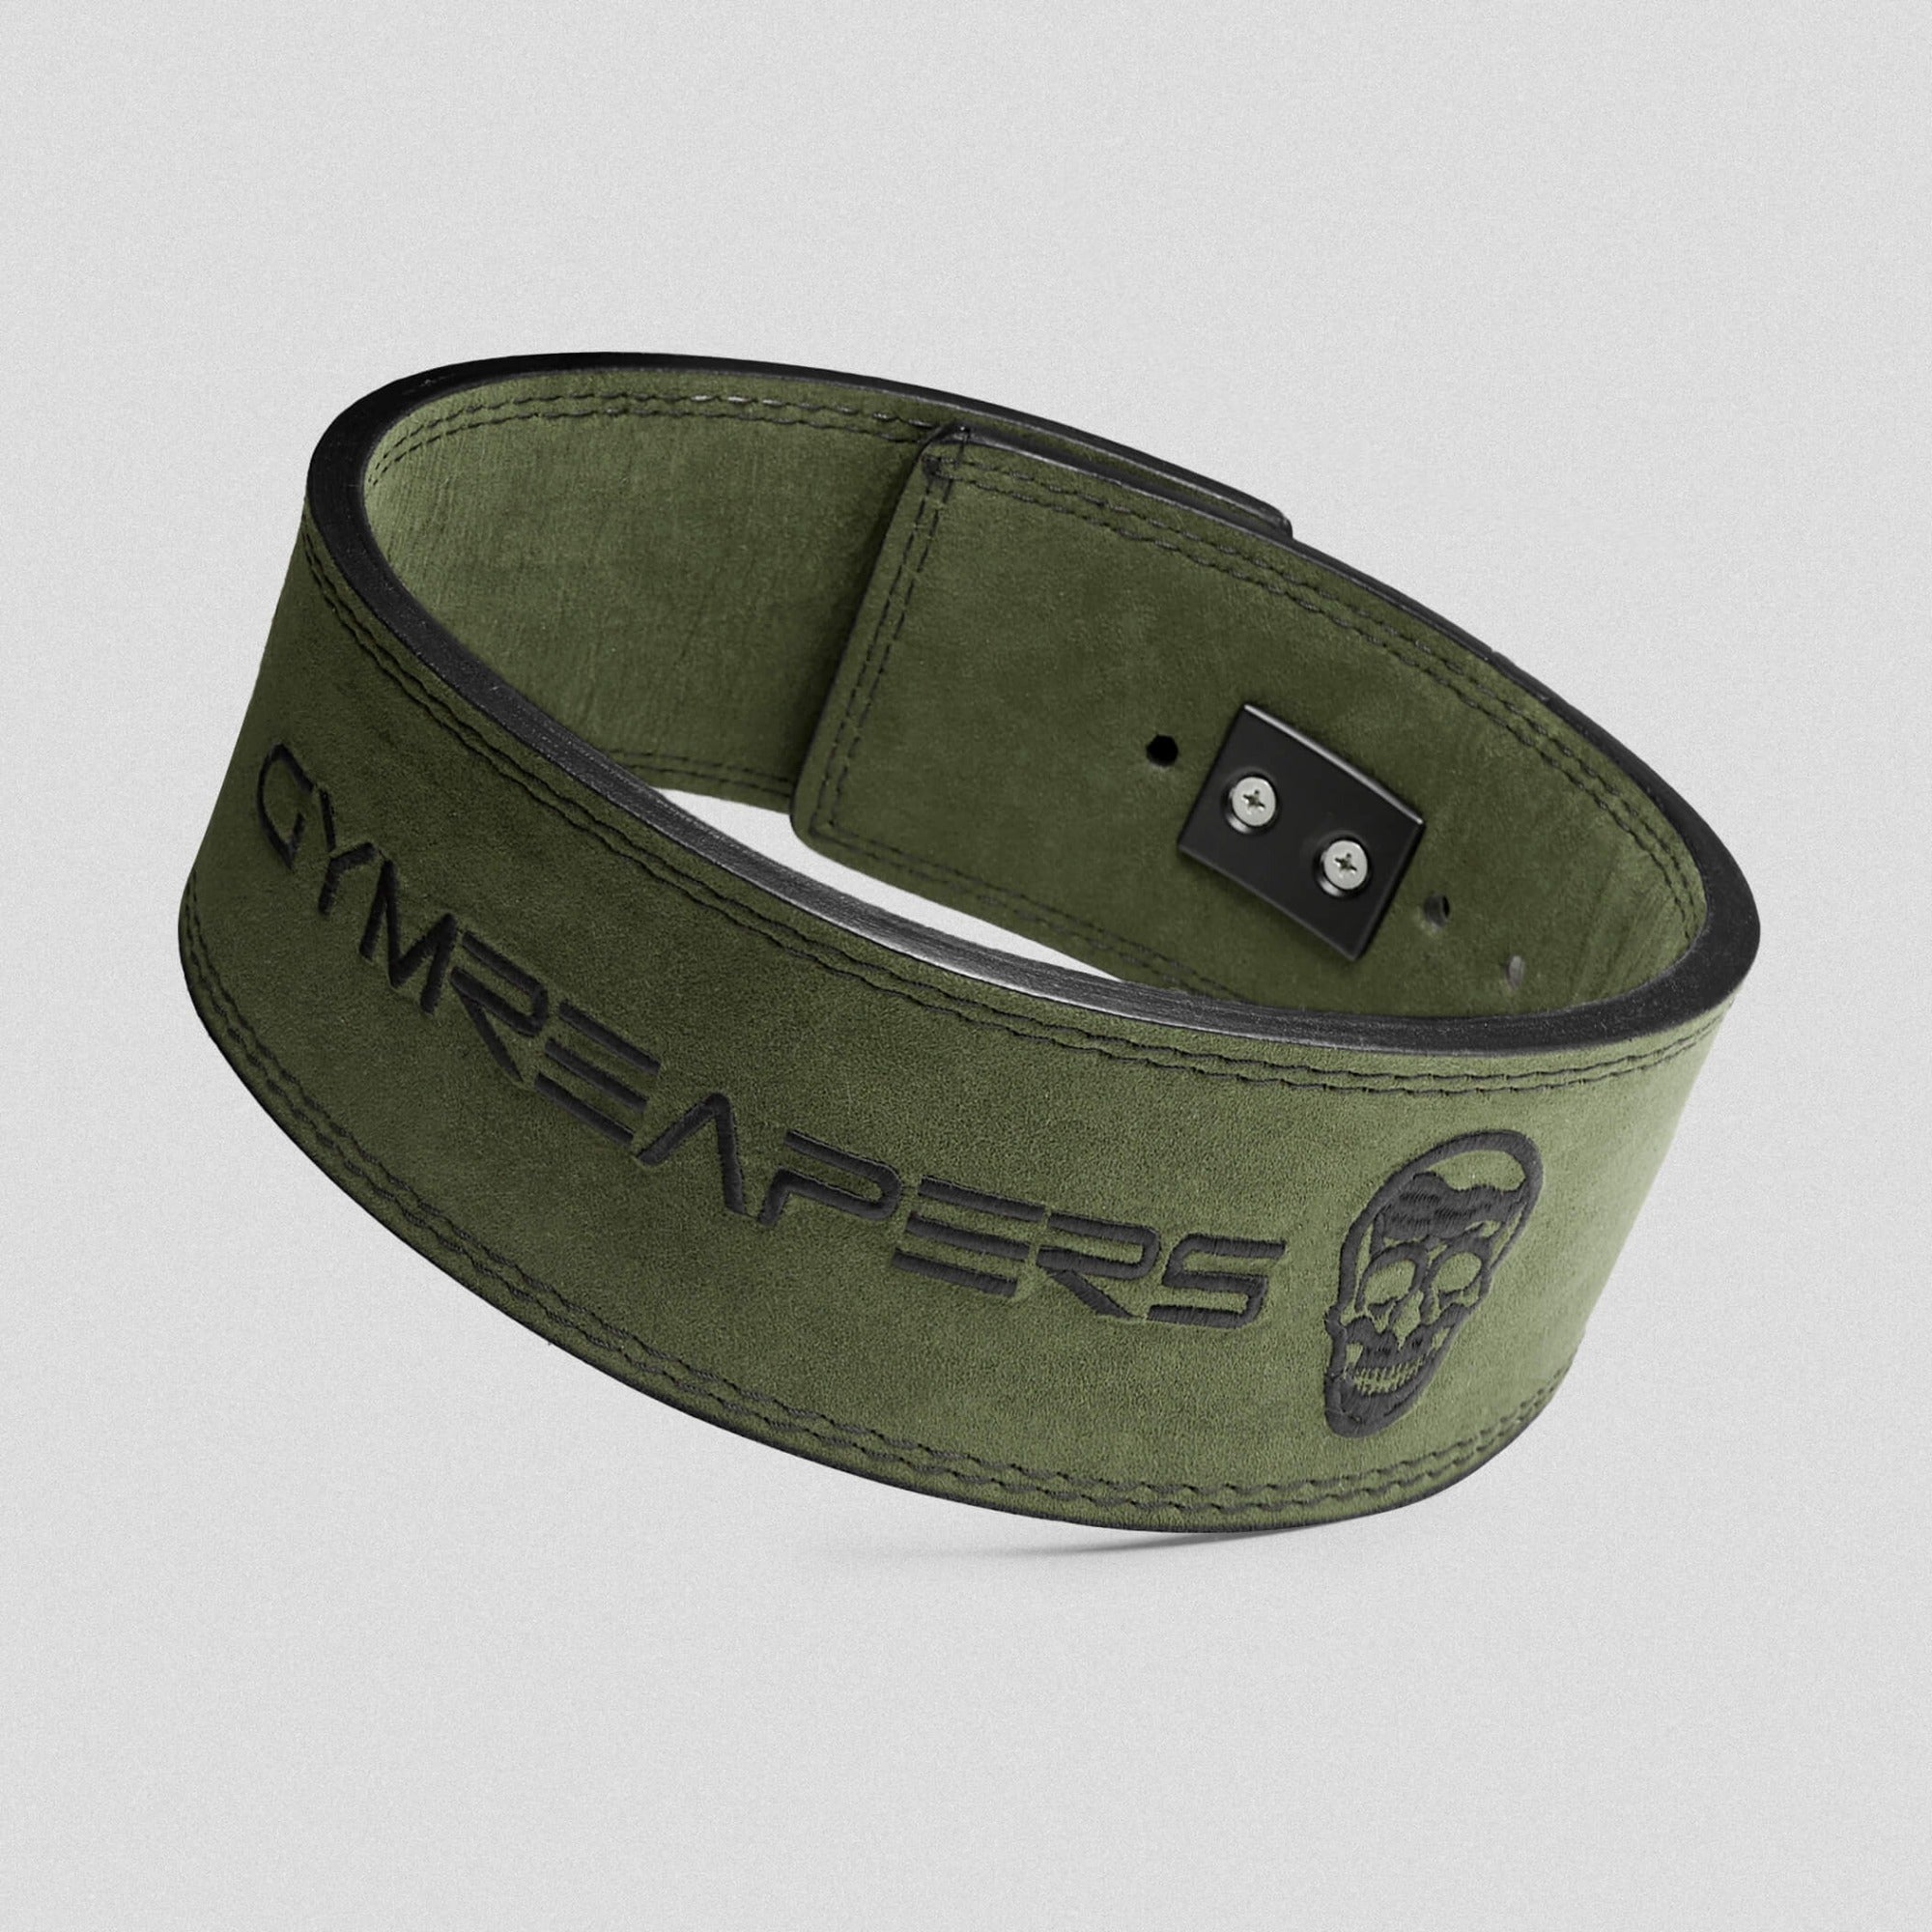 Gymreapers 10MM Lever Belt - Military Green